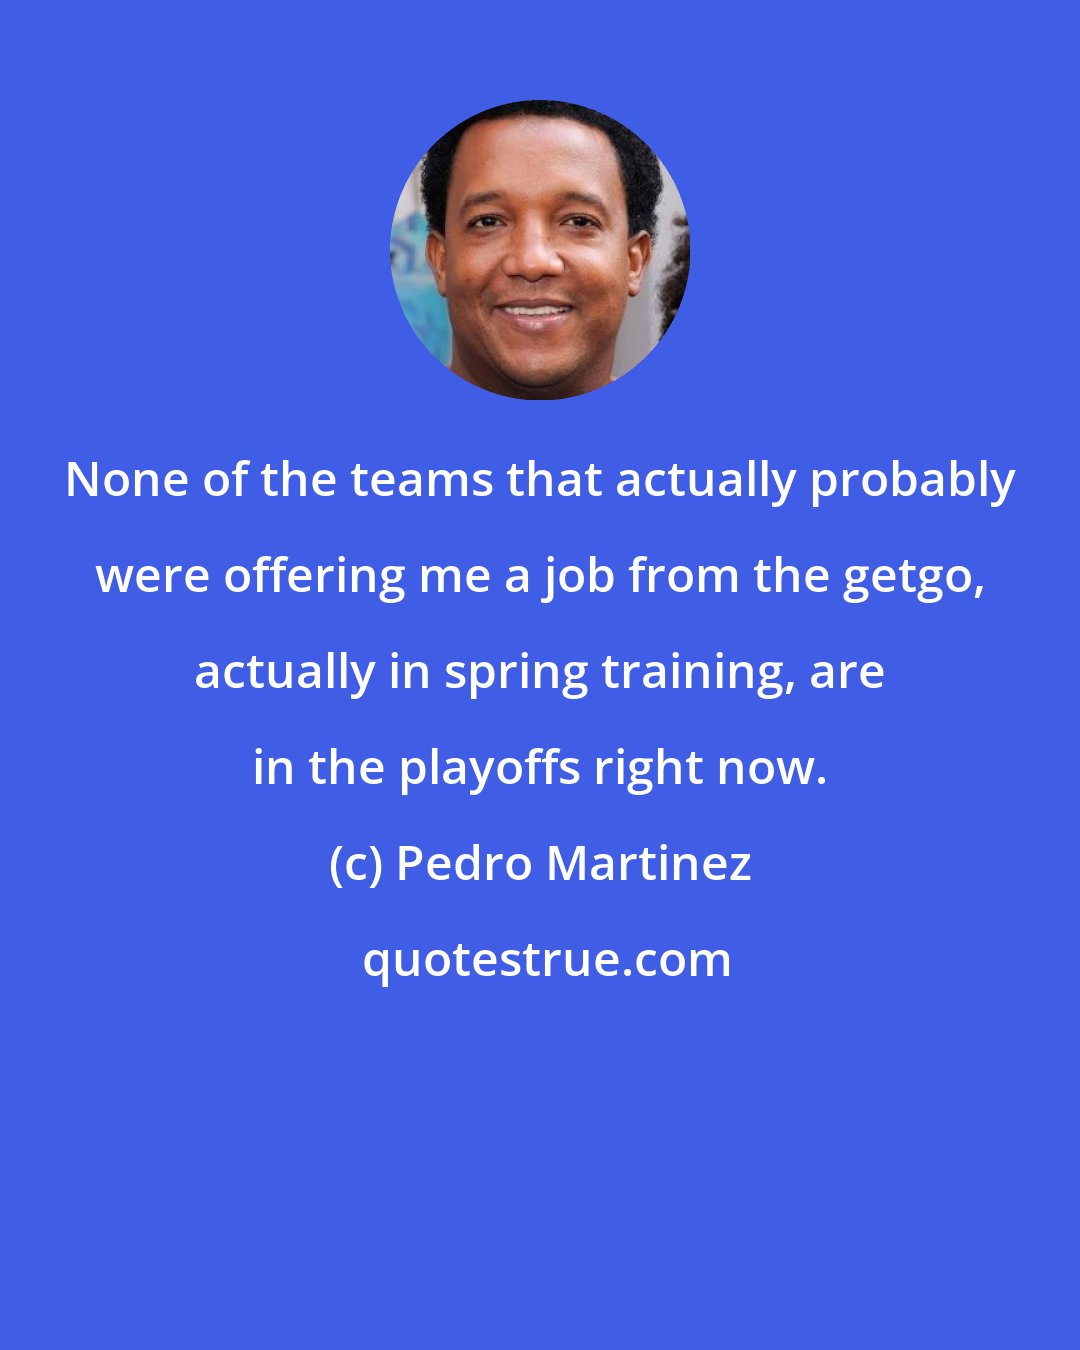 Pedro Martinez: None of the teams that actually probably were offering me a job from the getgo, actually in spring training, are in the playoffs right now.